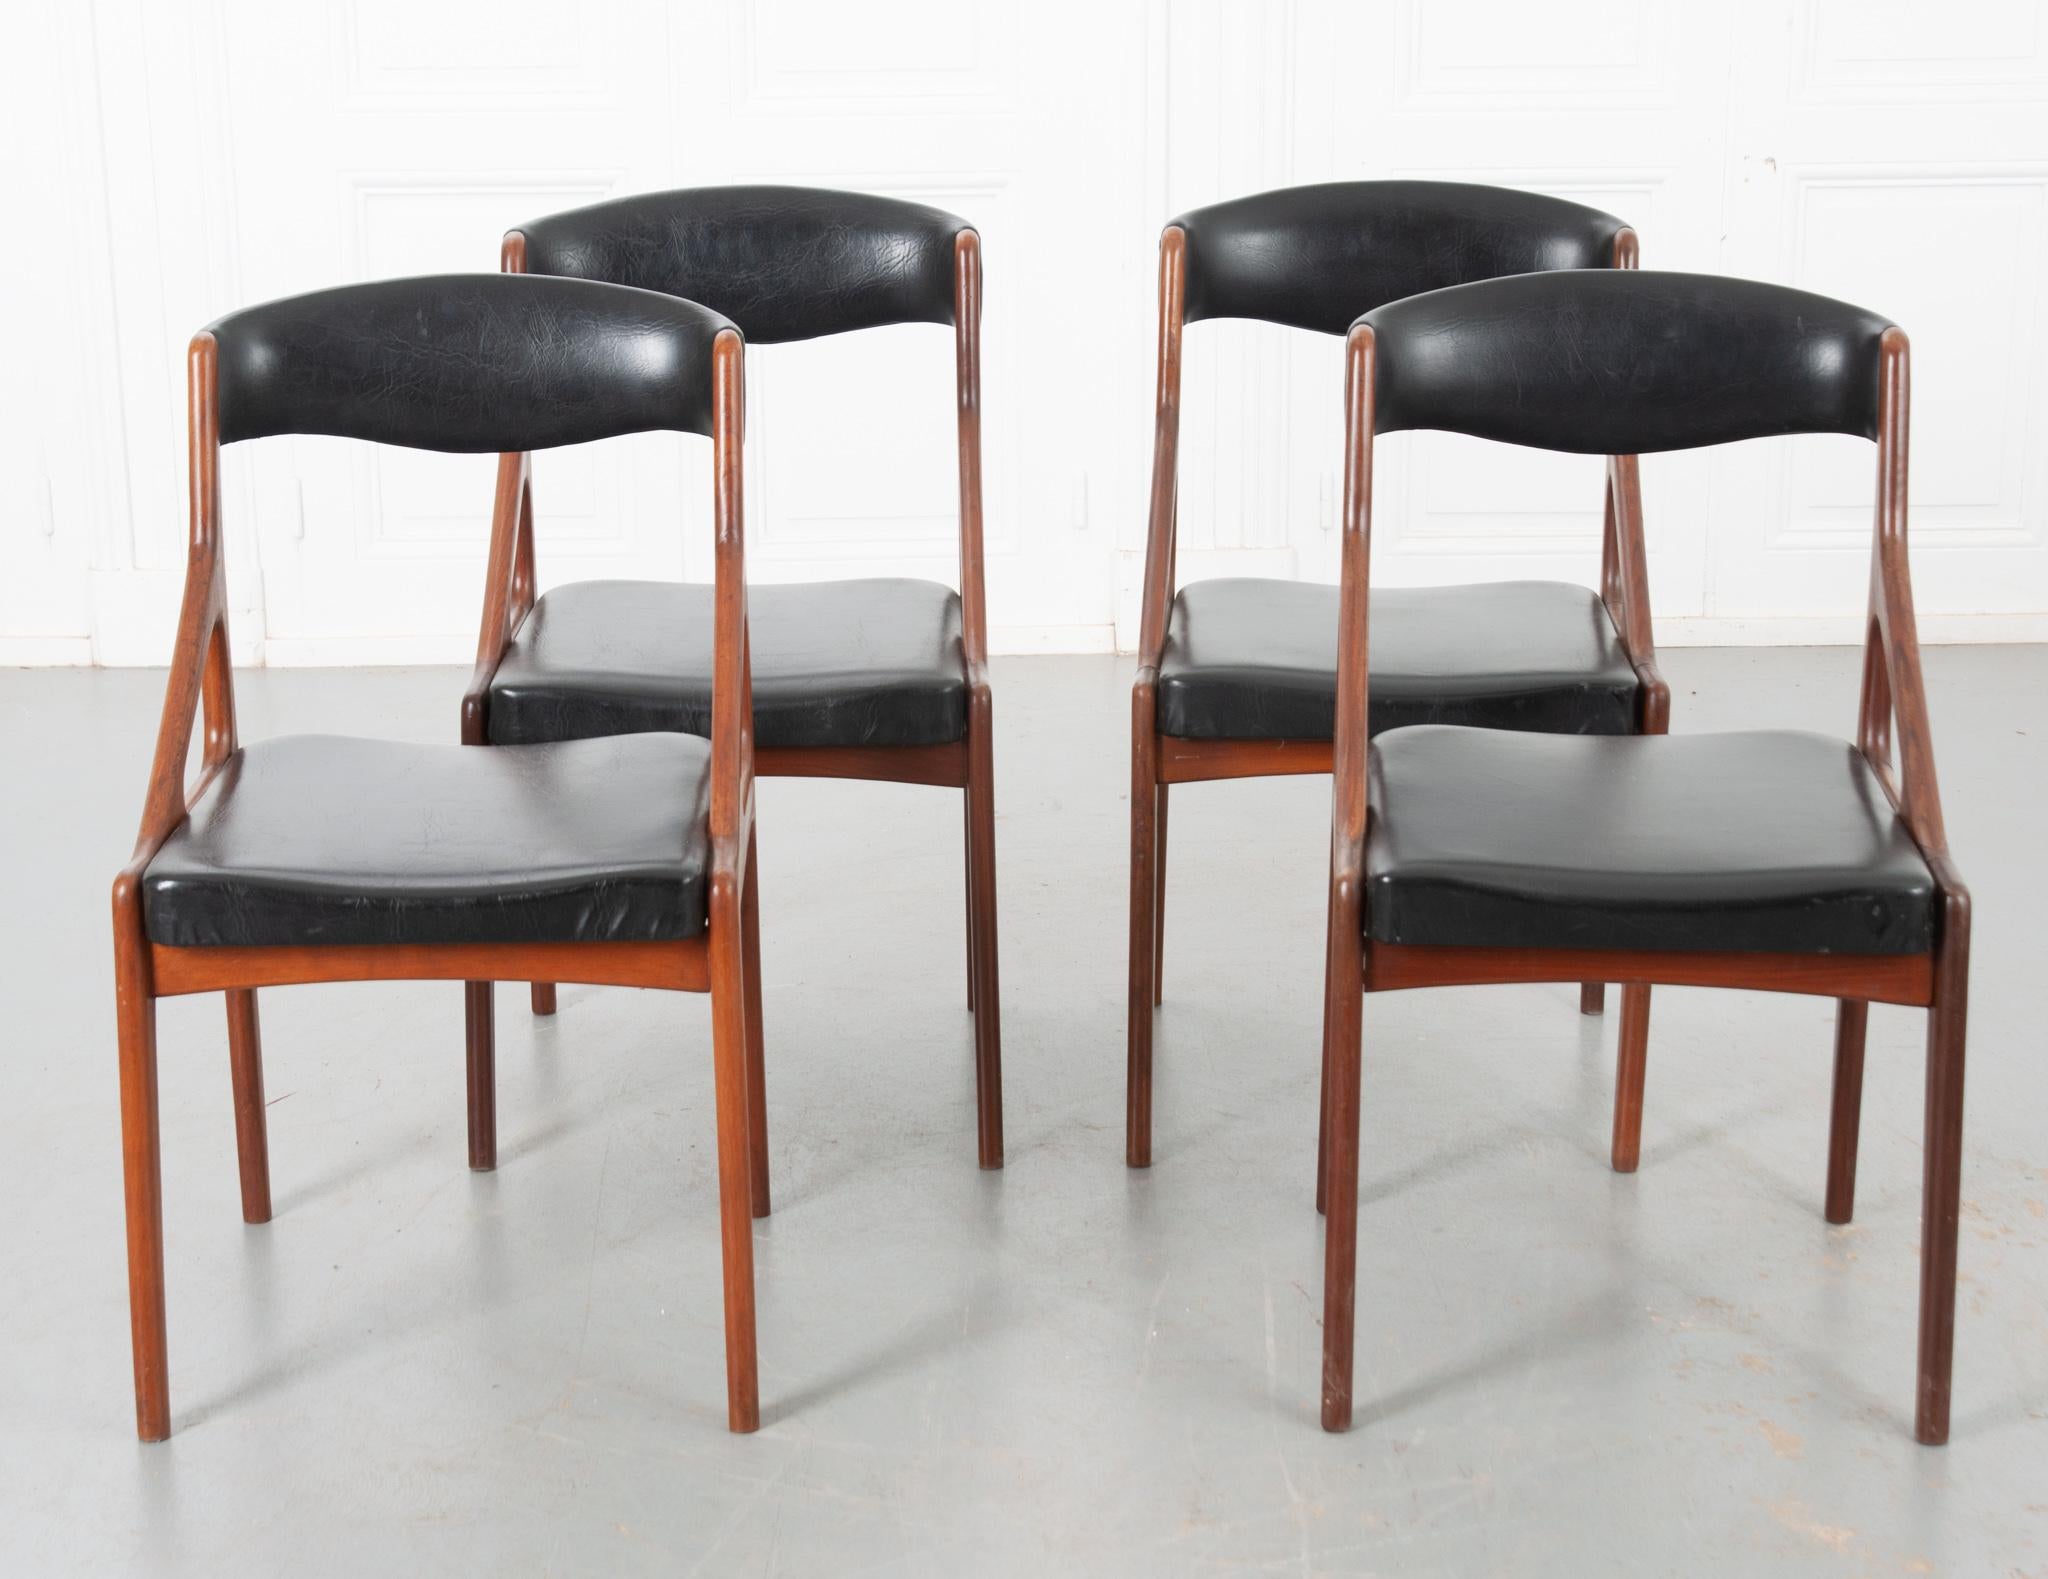 Carved Danish Set of 4 Mid Century Dining Chairs